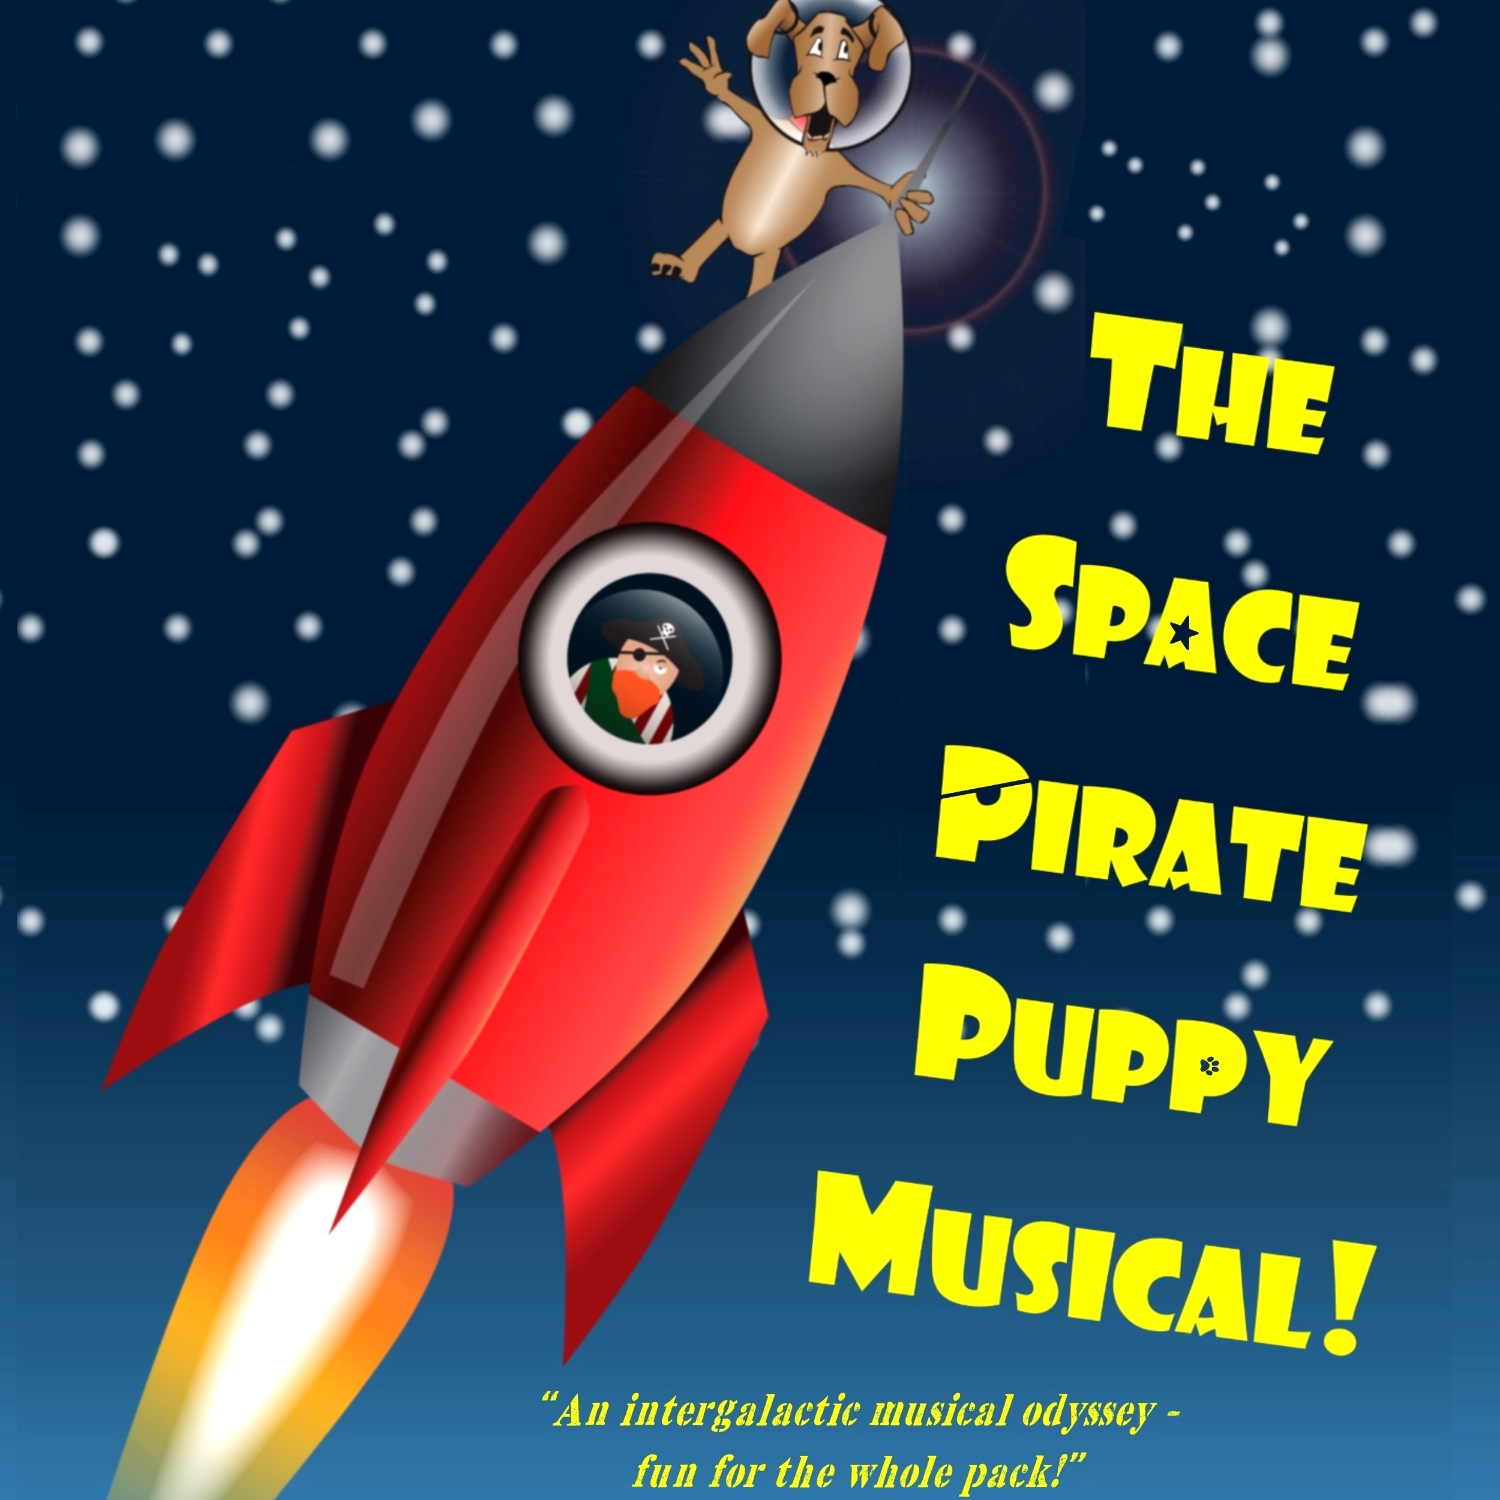 The Space Pirate Puppy Musical!